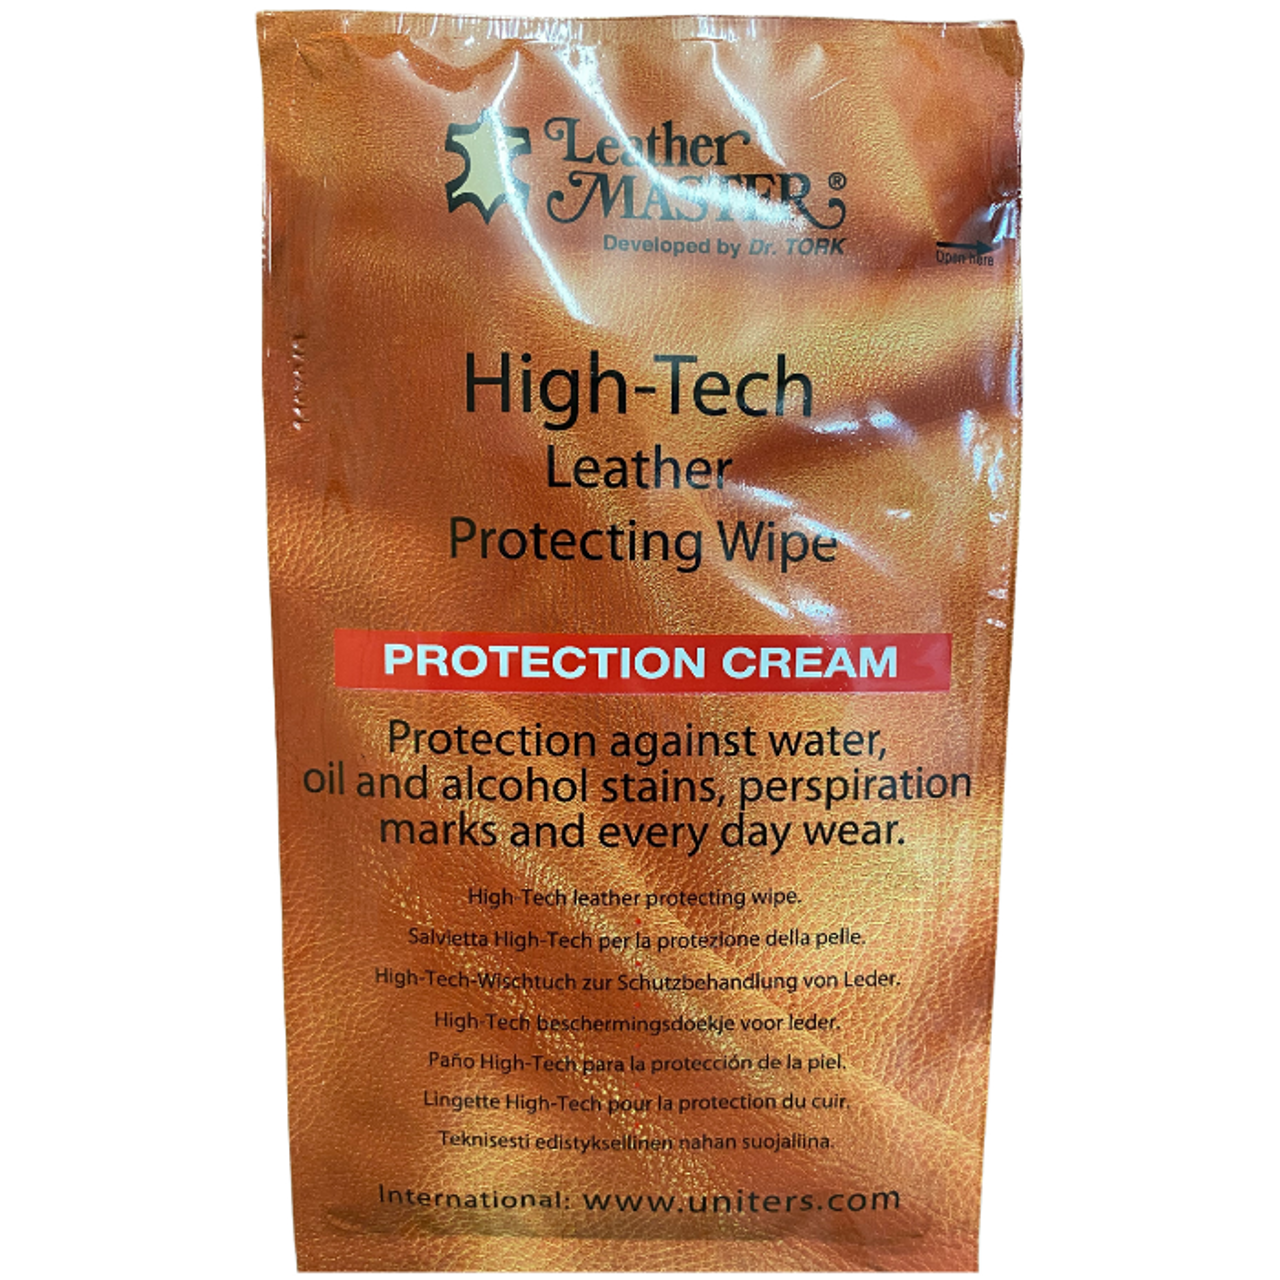 Leather Master Protection Cream Wipe